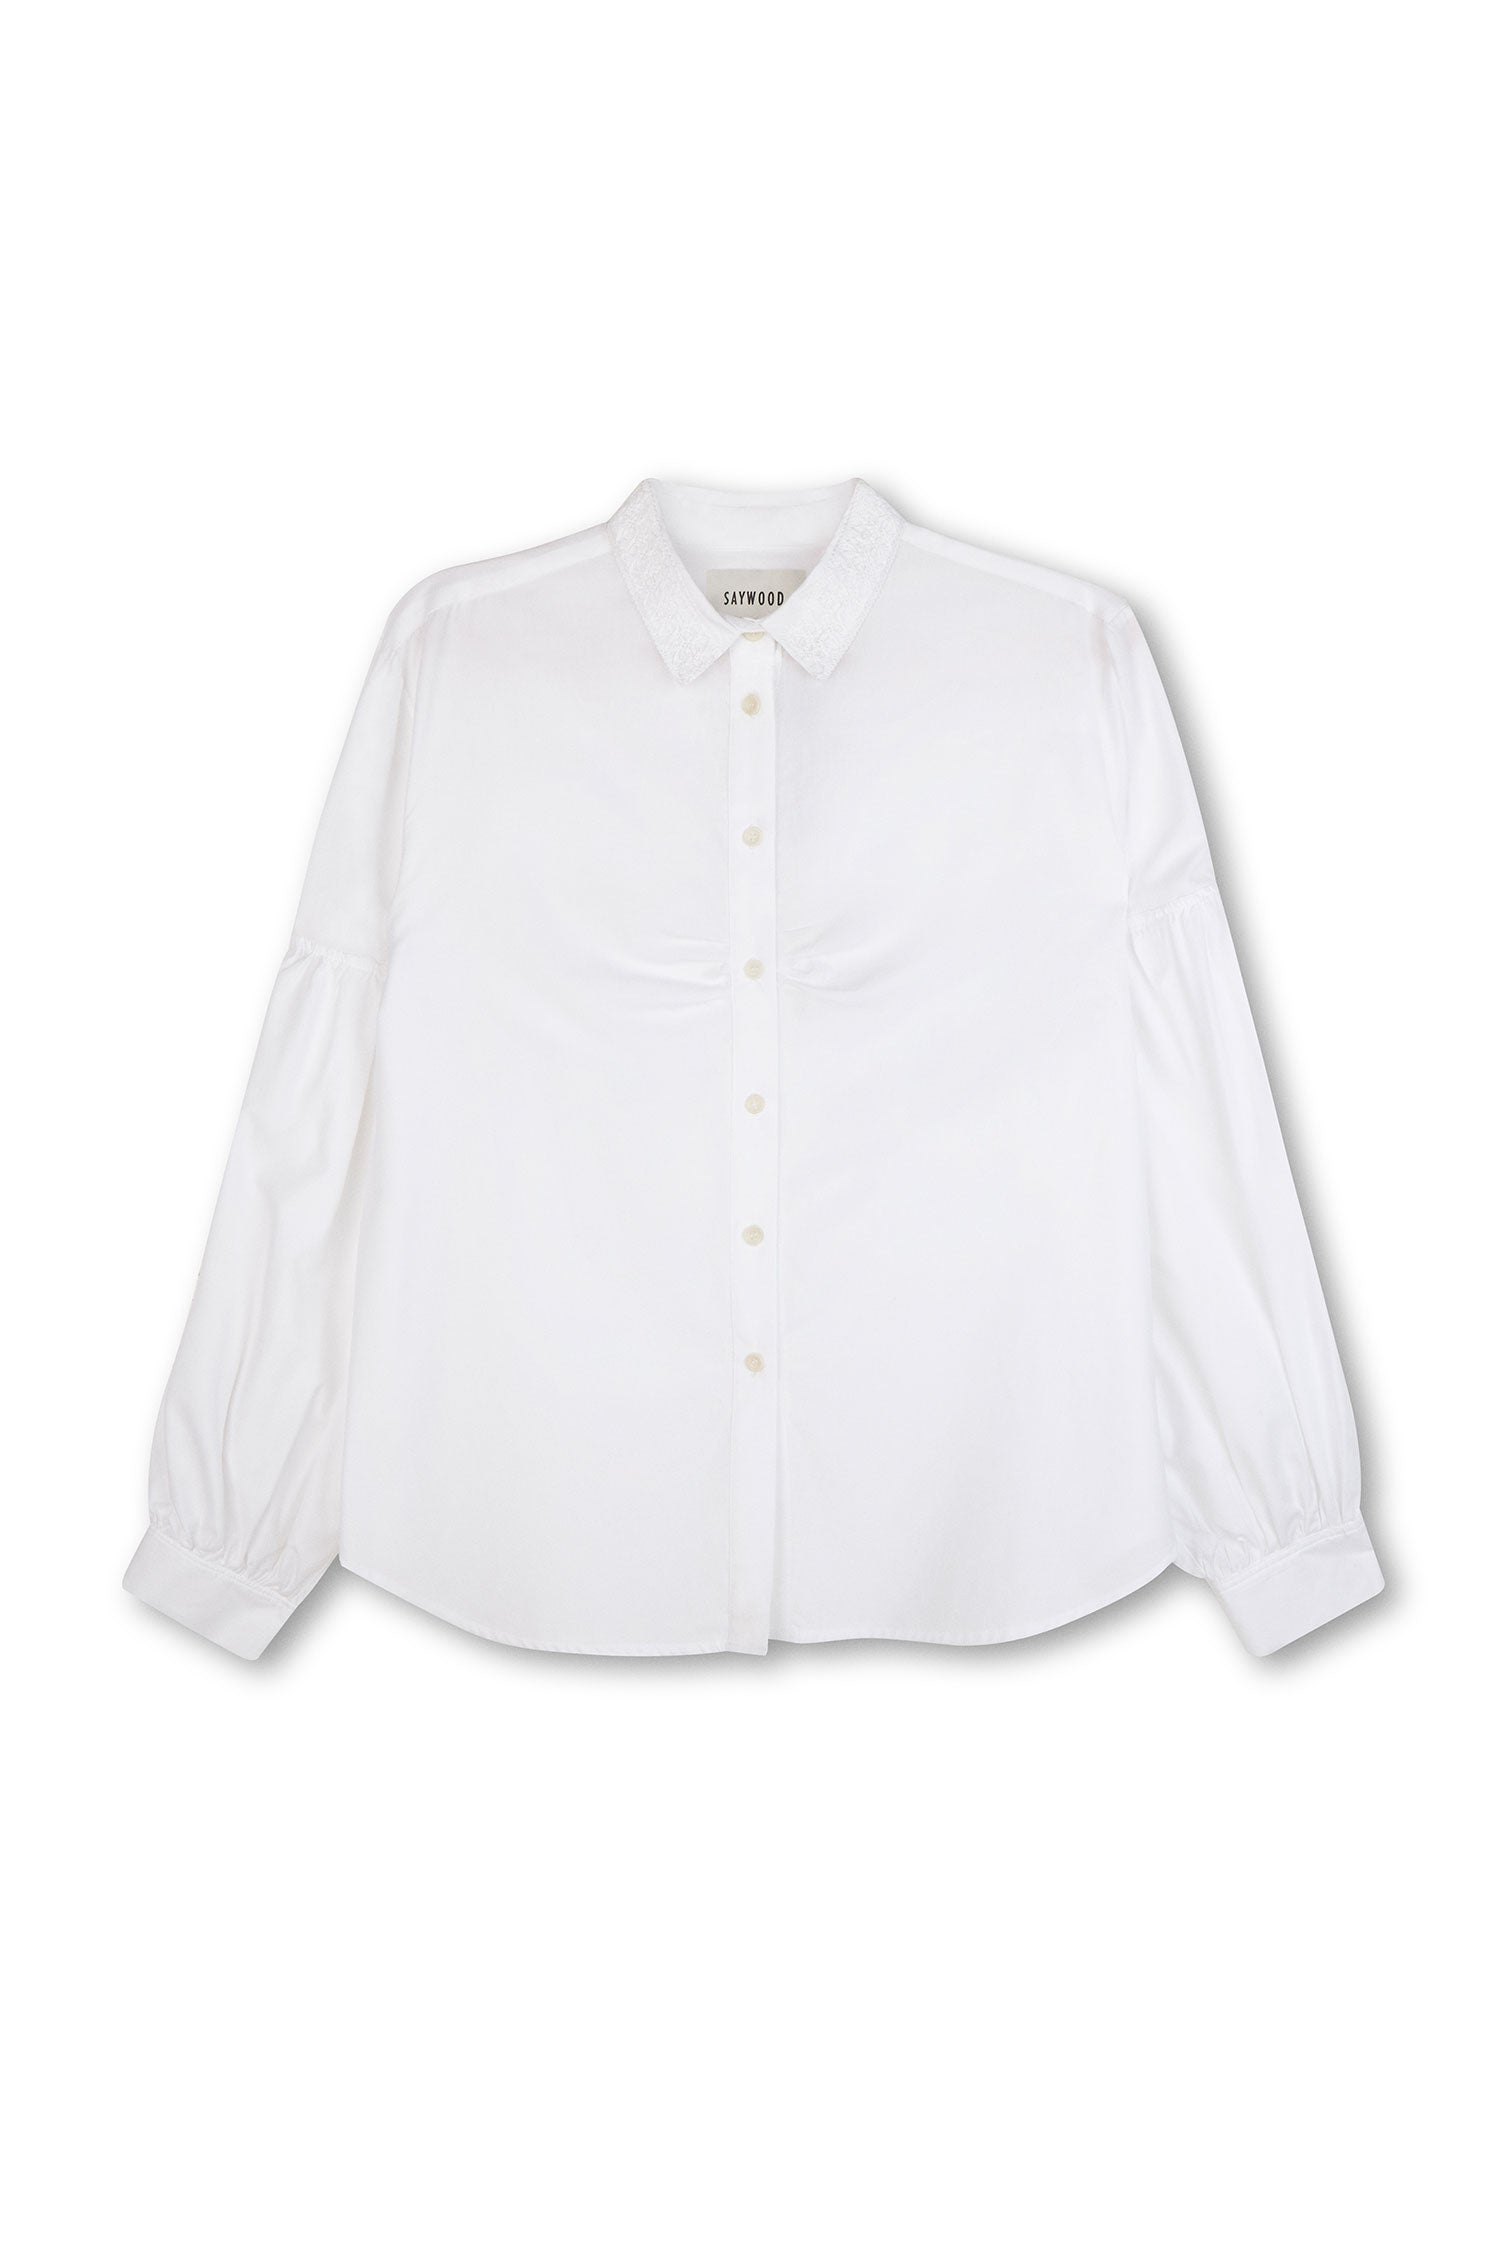 Womens white shirt with lace collar and volume sleeves, with soft gathering at the bust. Shirt is on a white background